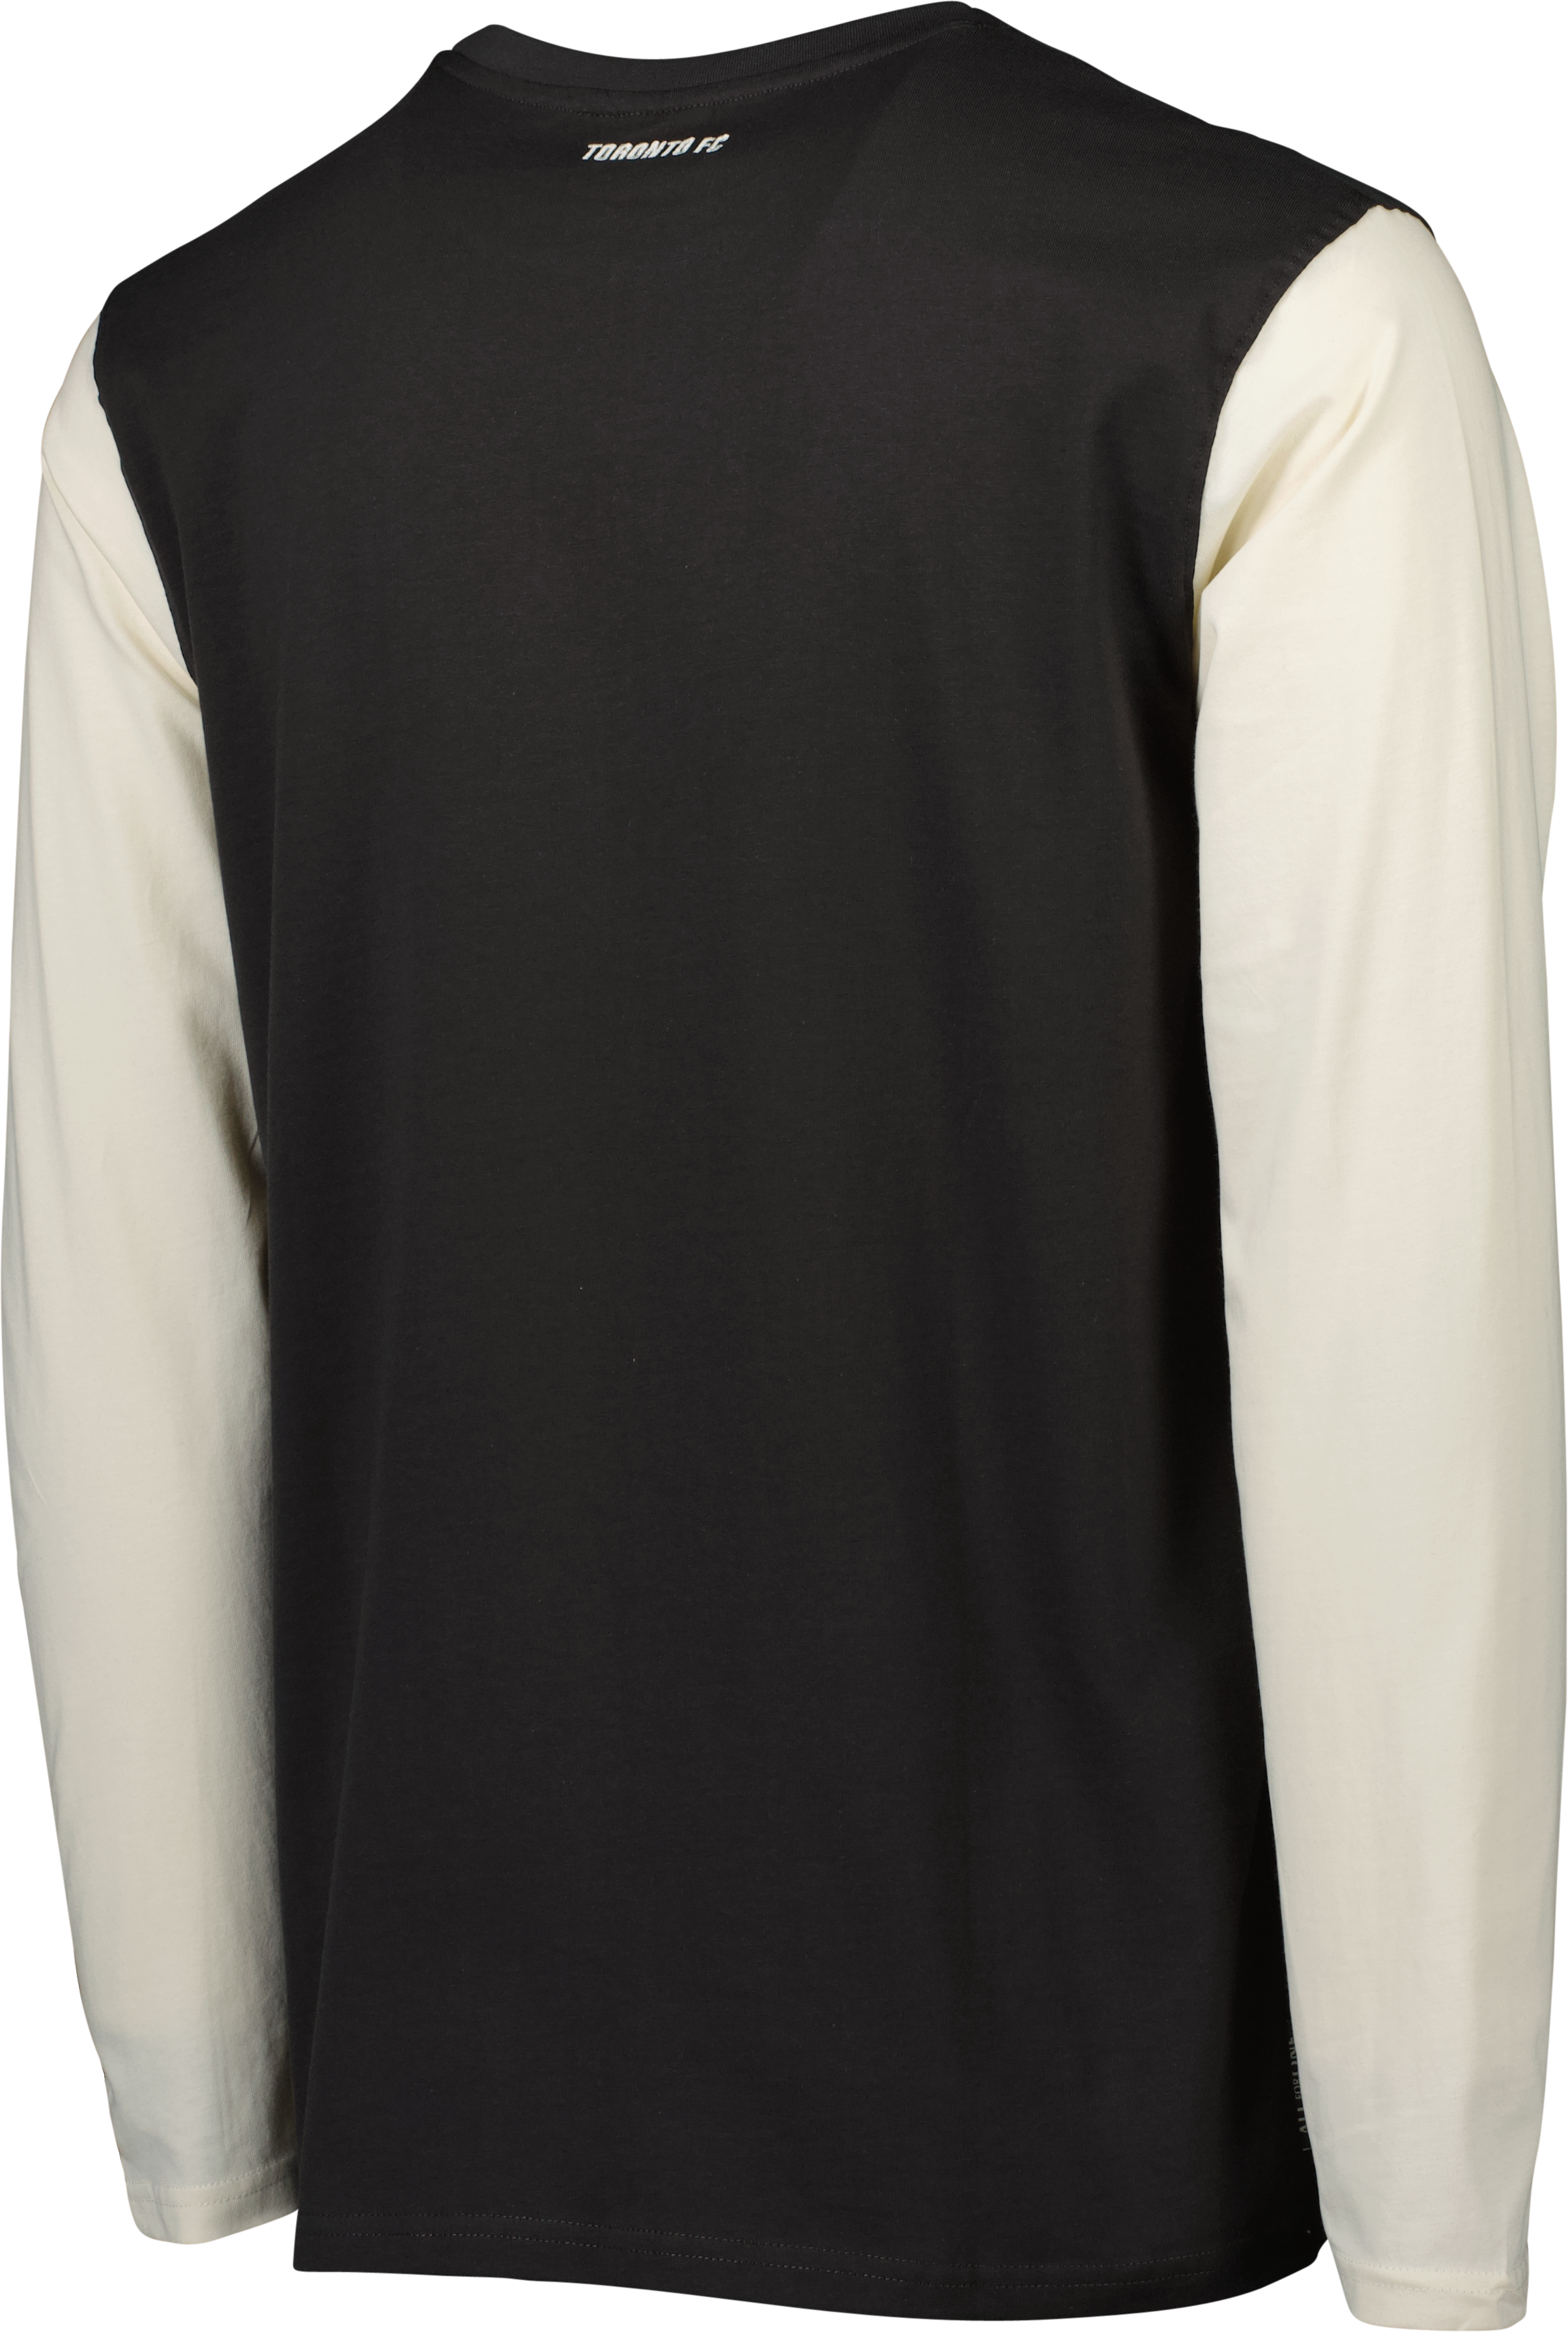 Toronto FC Men's Relaxed Fit Long Sleeve